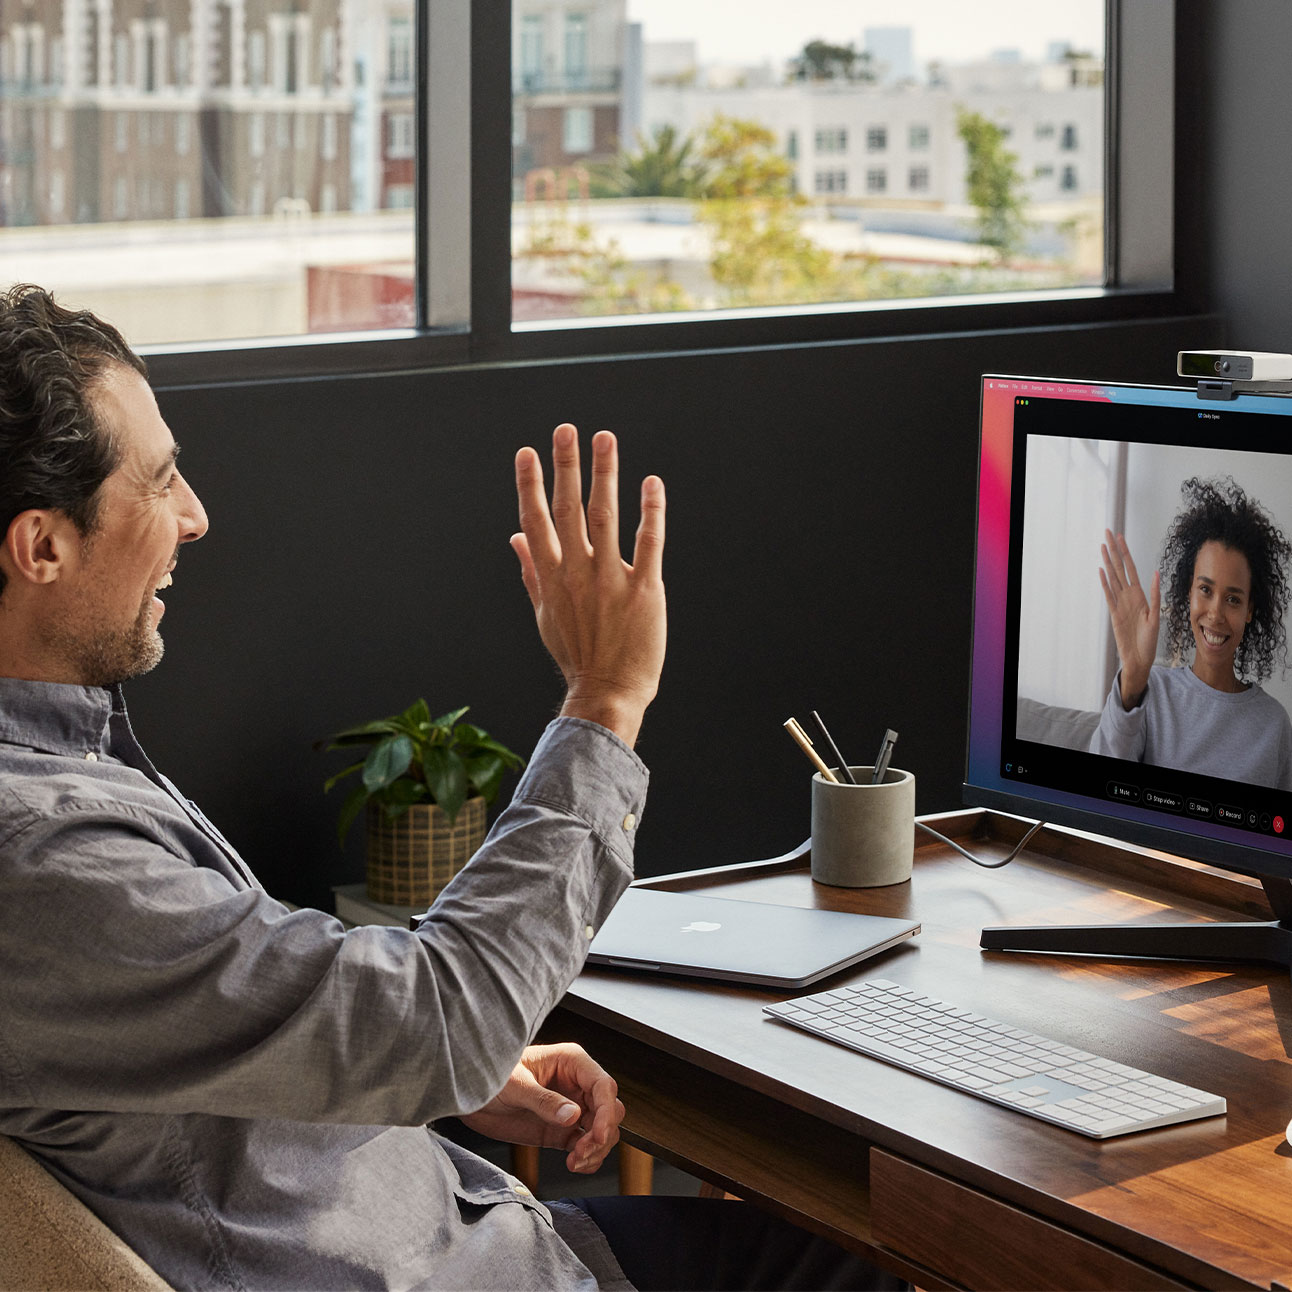 Remote worker waves to his colleague during an online meeting with a Cisco webcam.